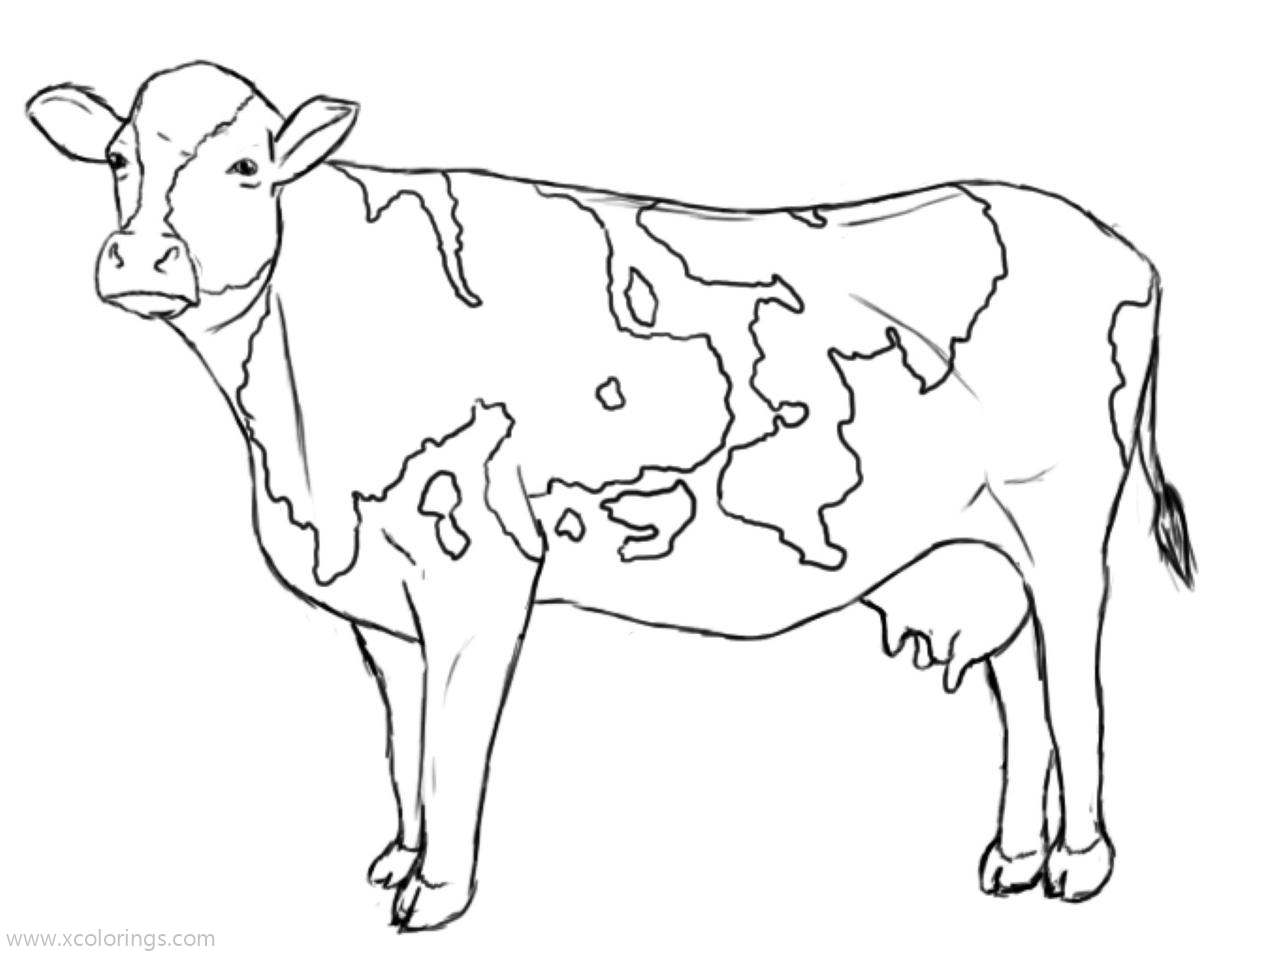 Free Ayrshire Cow Coloring Page printable